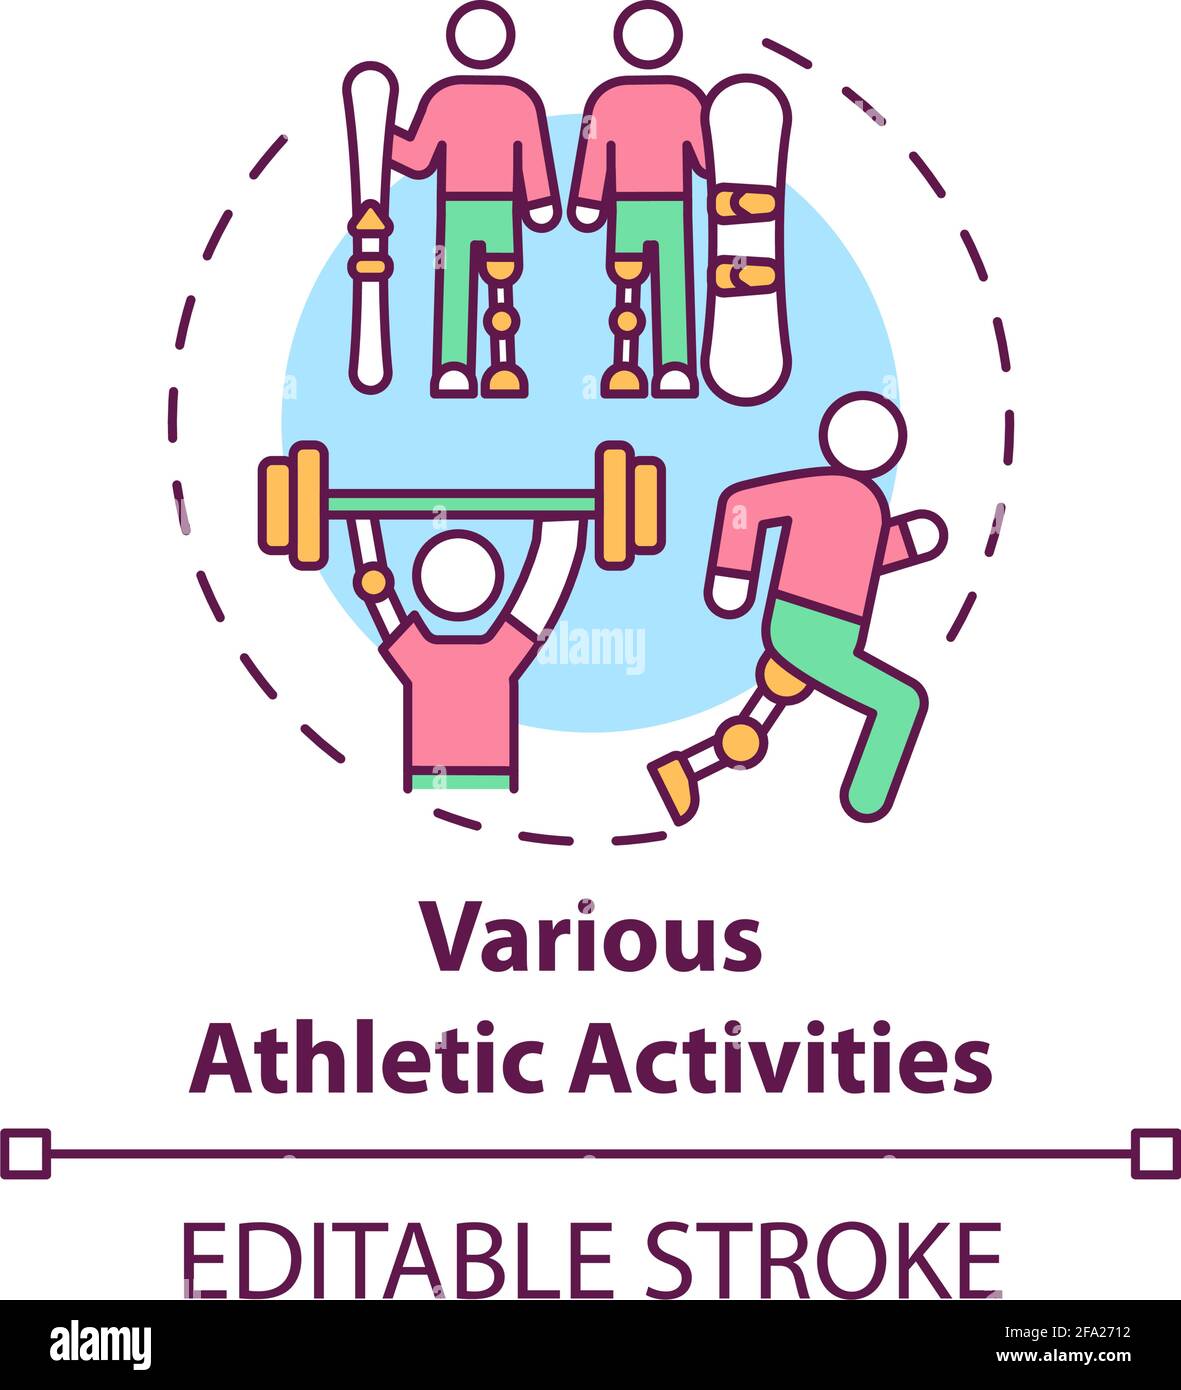 Various athletic activities concept icon Stock Vector